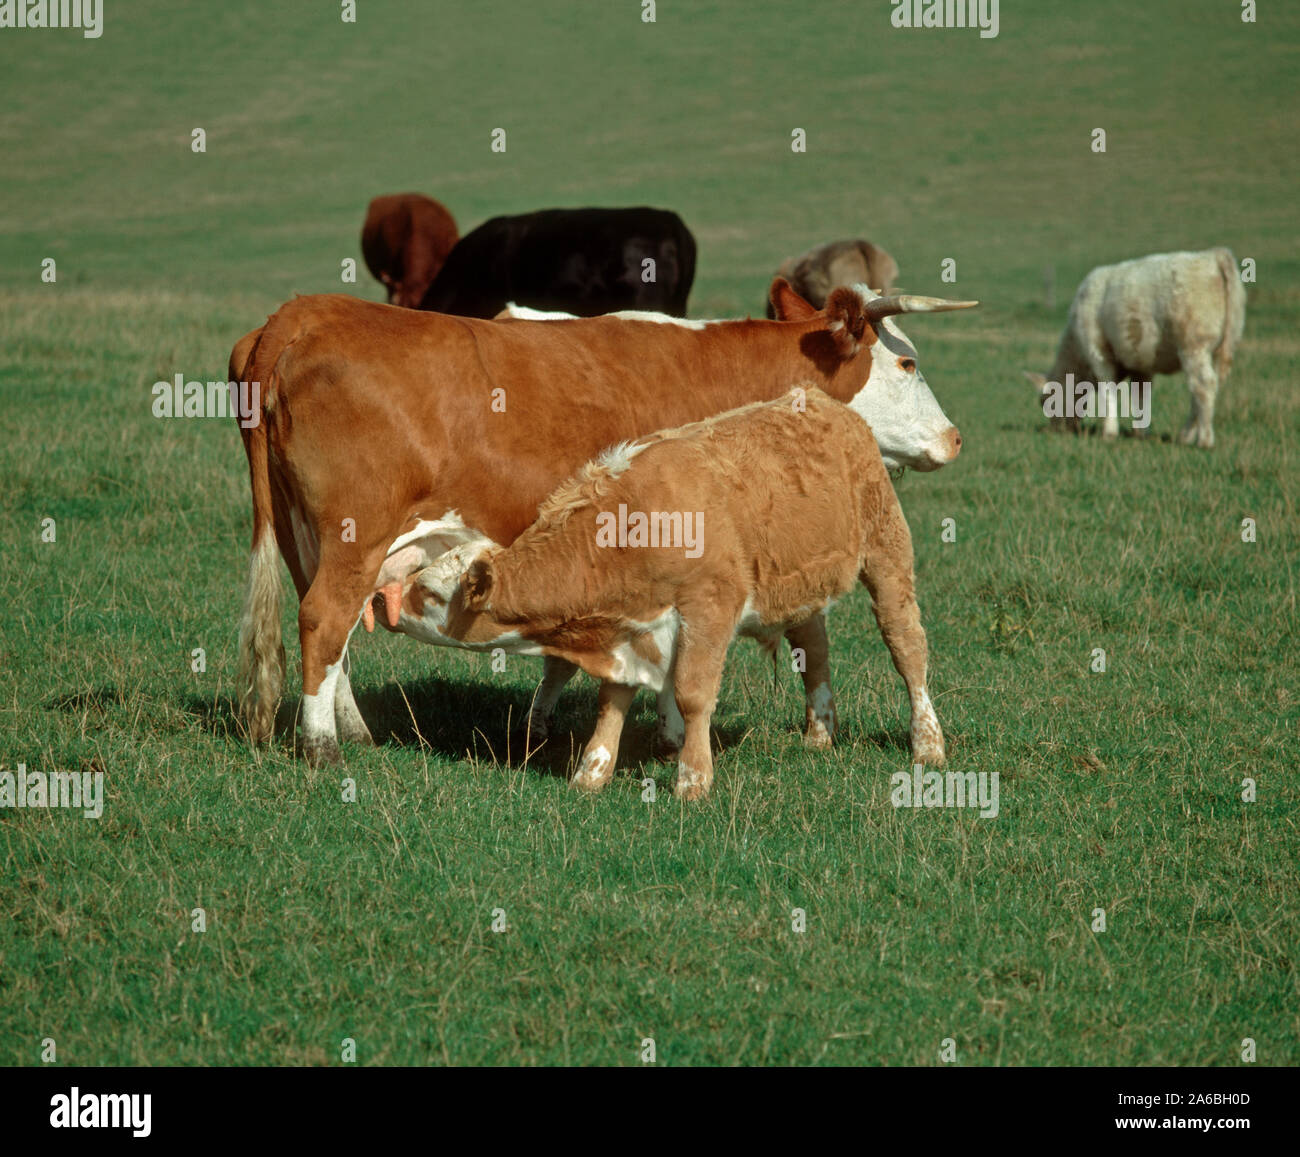 Older calf suckling milk from its mother among cows in a suckler herd grazing on a downland pasture Stock Photo